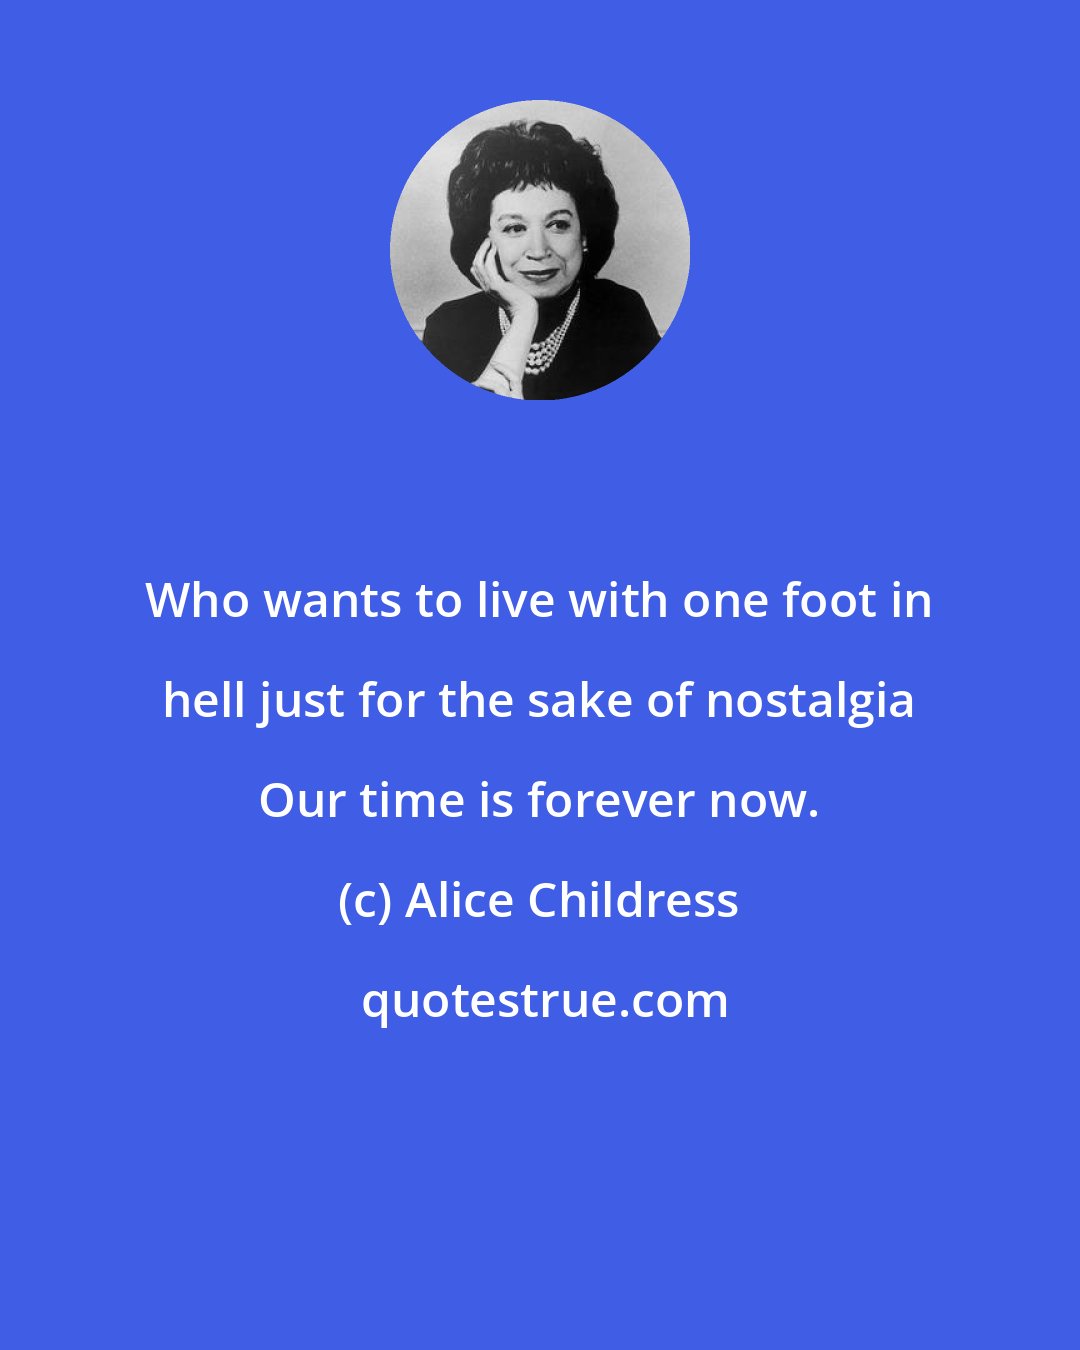 Alice Childress: Who wants to live with one foot in hell just for the sake of nostalgia Our time is forever now.